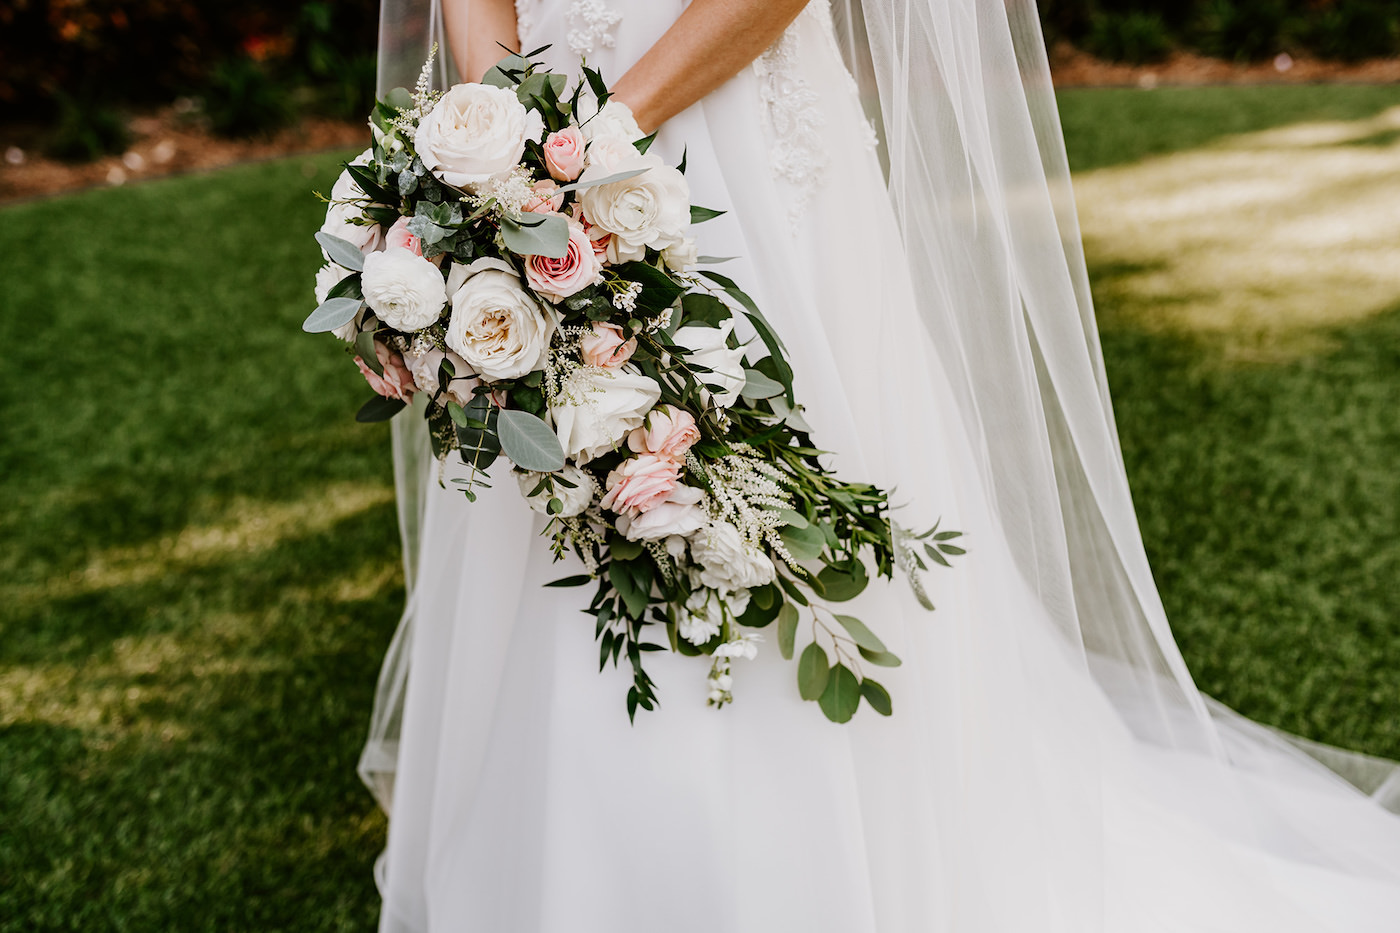 Cascade Bridal Bouquet with White and Blush Pink Roses and Ranunculus, White Astilbe, Ivory Stock, Greenery and Eucalyptus | Tampa Wedding Florist Monarch Events and Design